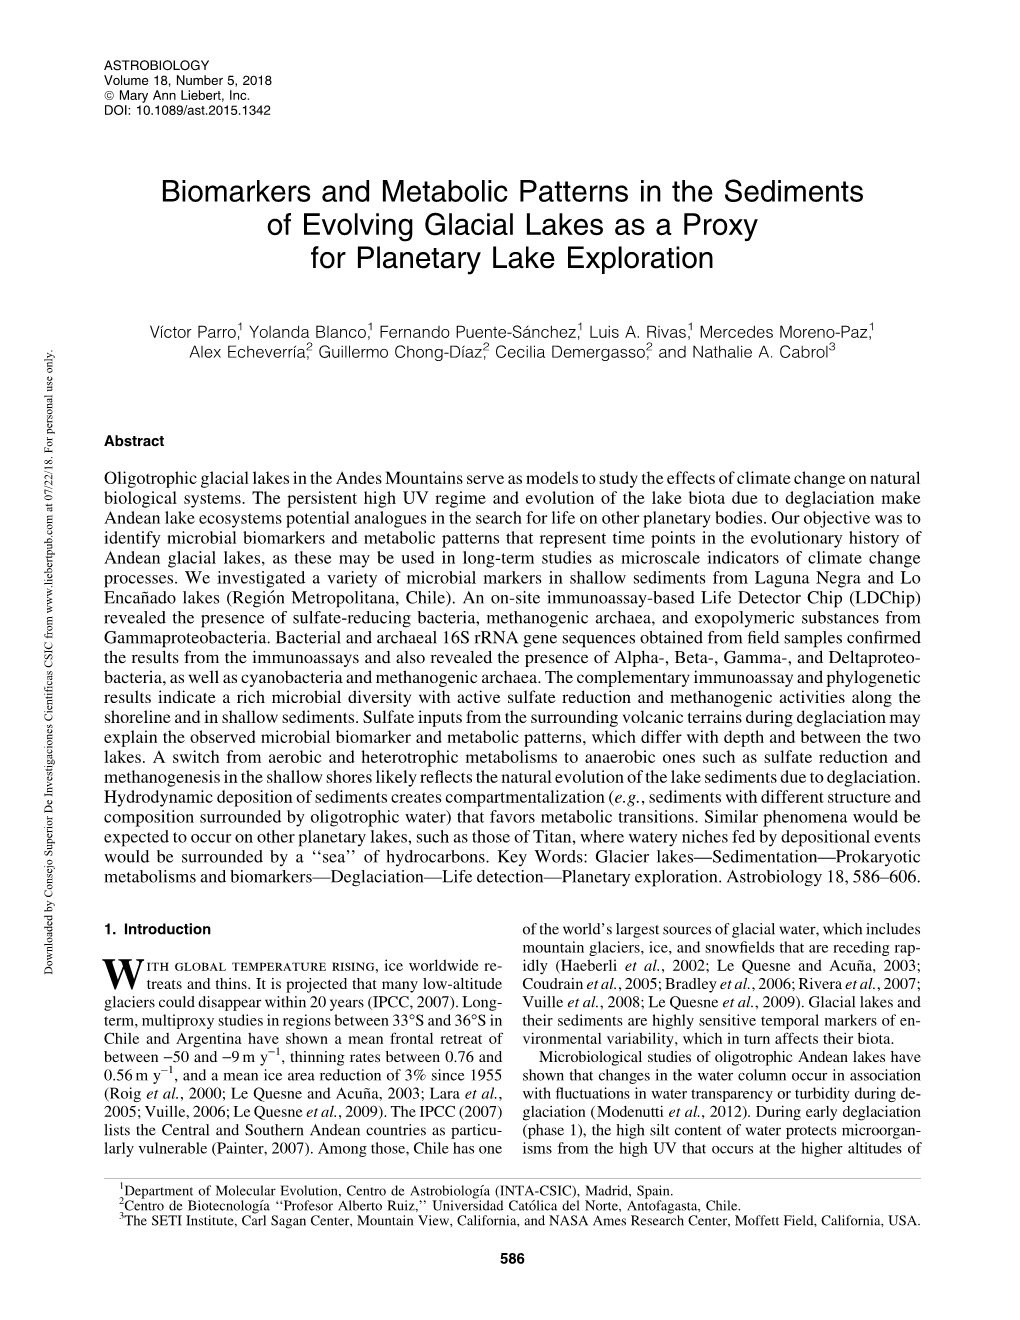 Biomarkers and Metabolic Patterns in the Sediments of Evolving Glacial Lakes As a Proxy for Planetary Lake Exploration